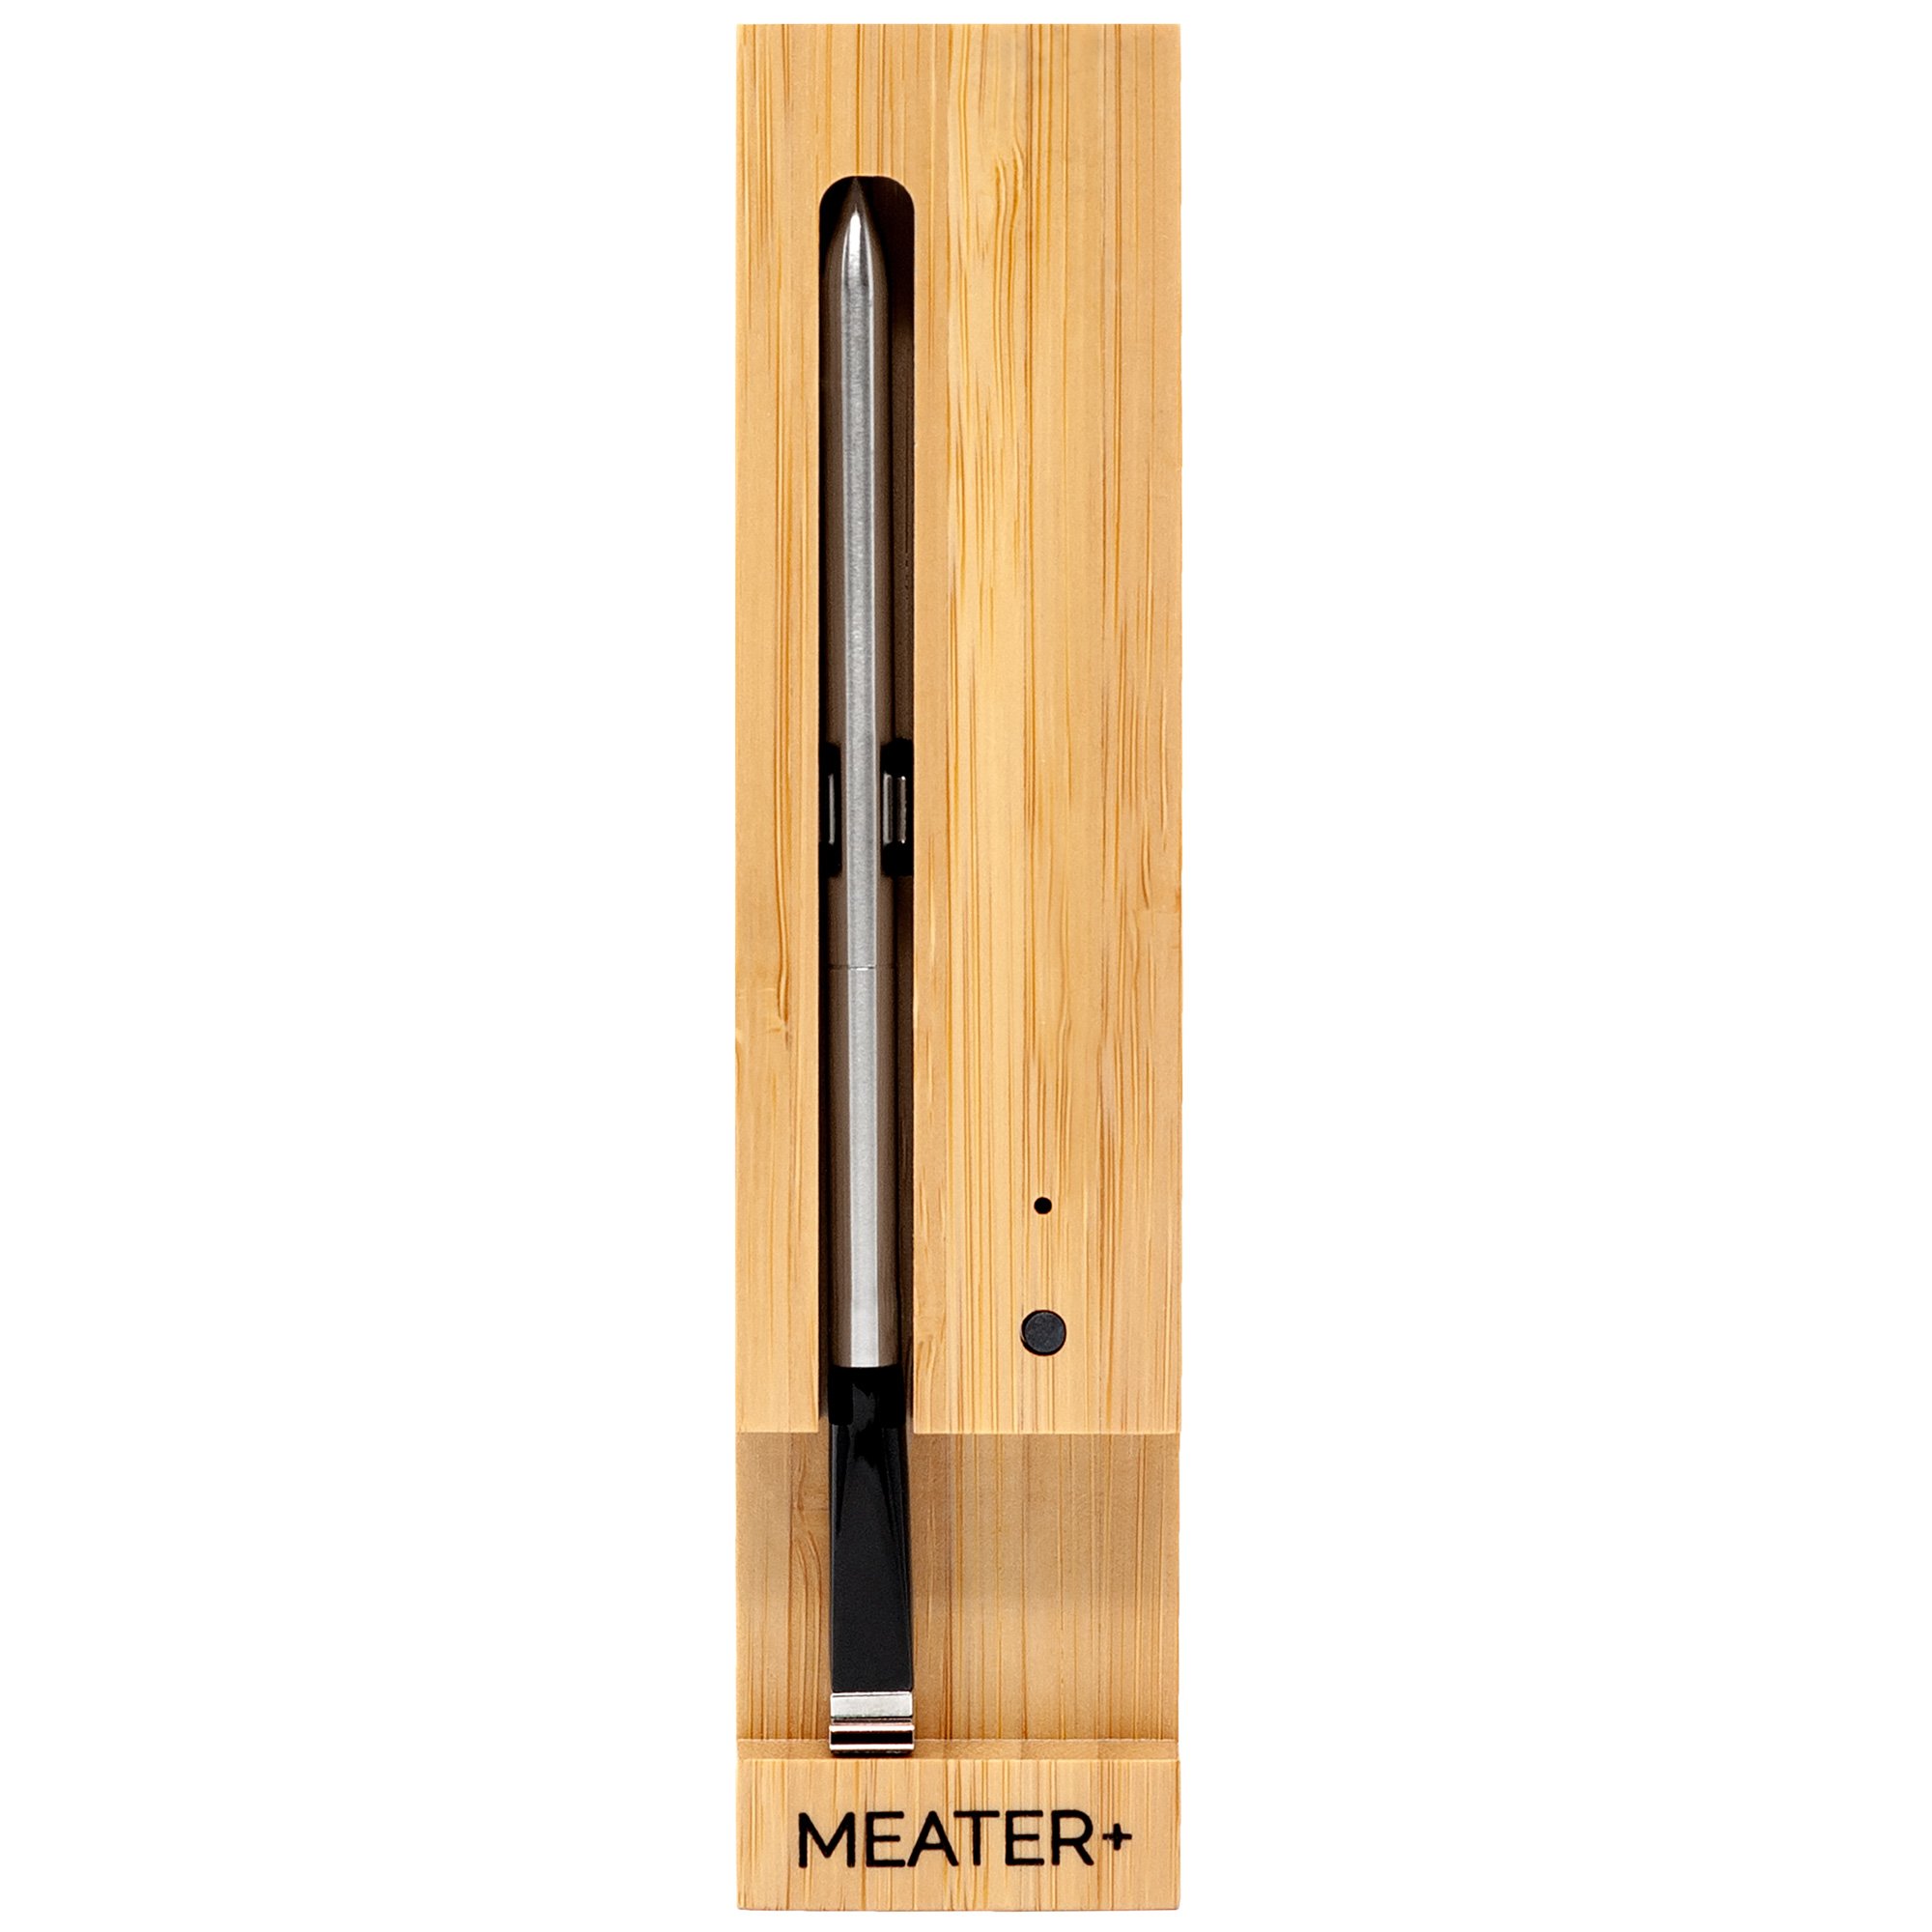 Meater Plus stektermometer